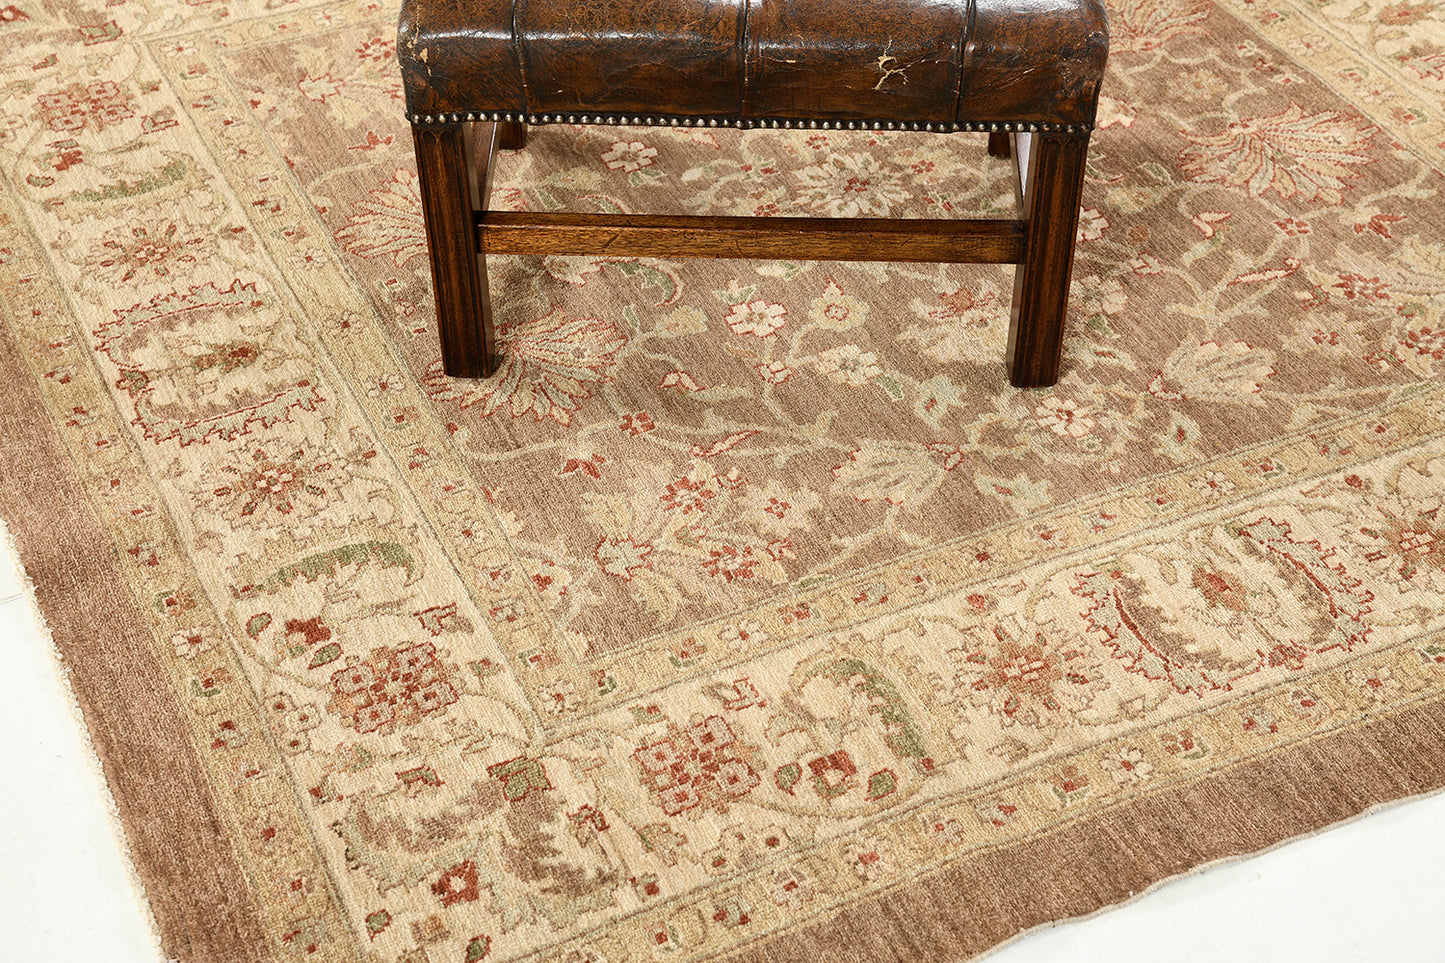 Natural Dye Sultanabad Revival Square Rug